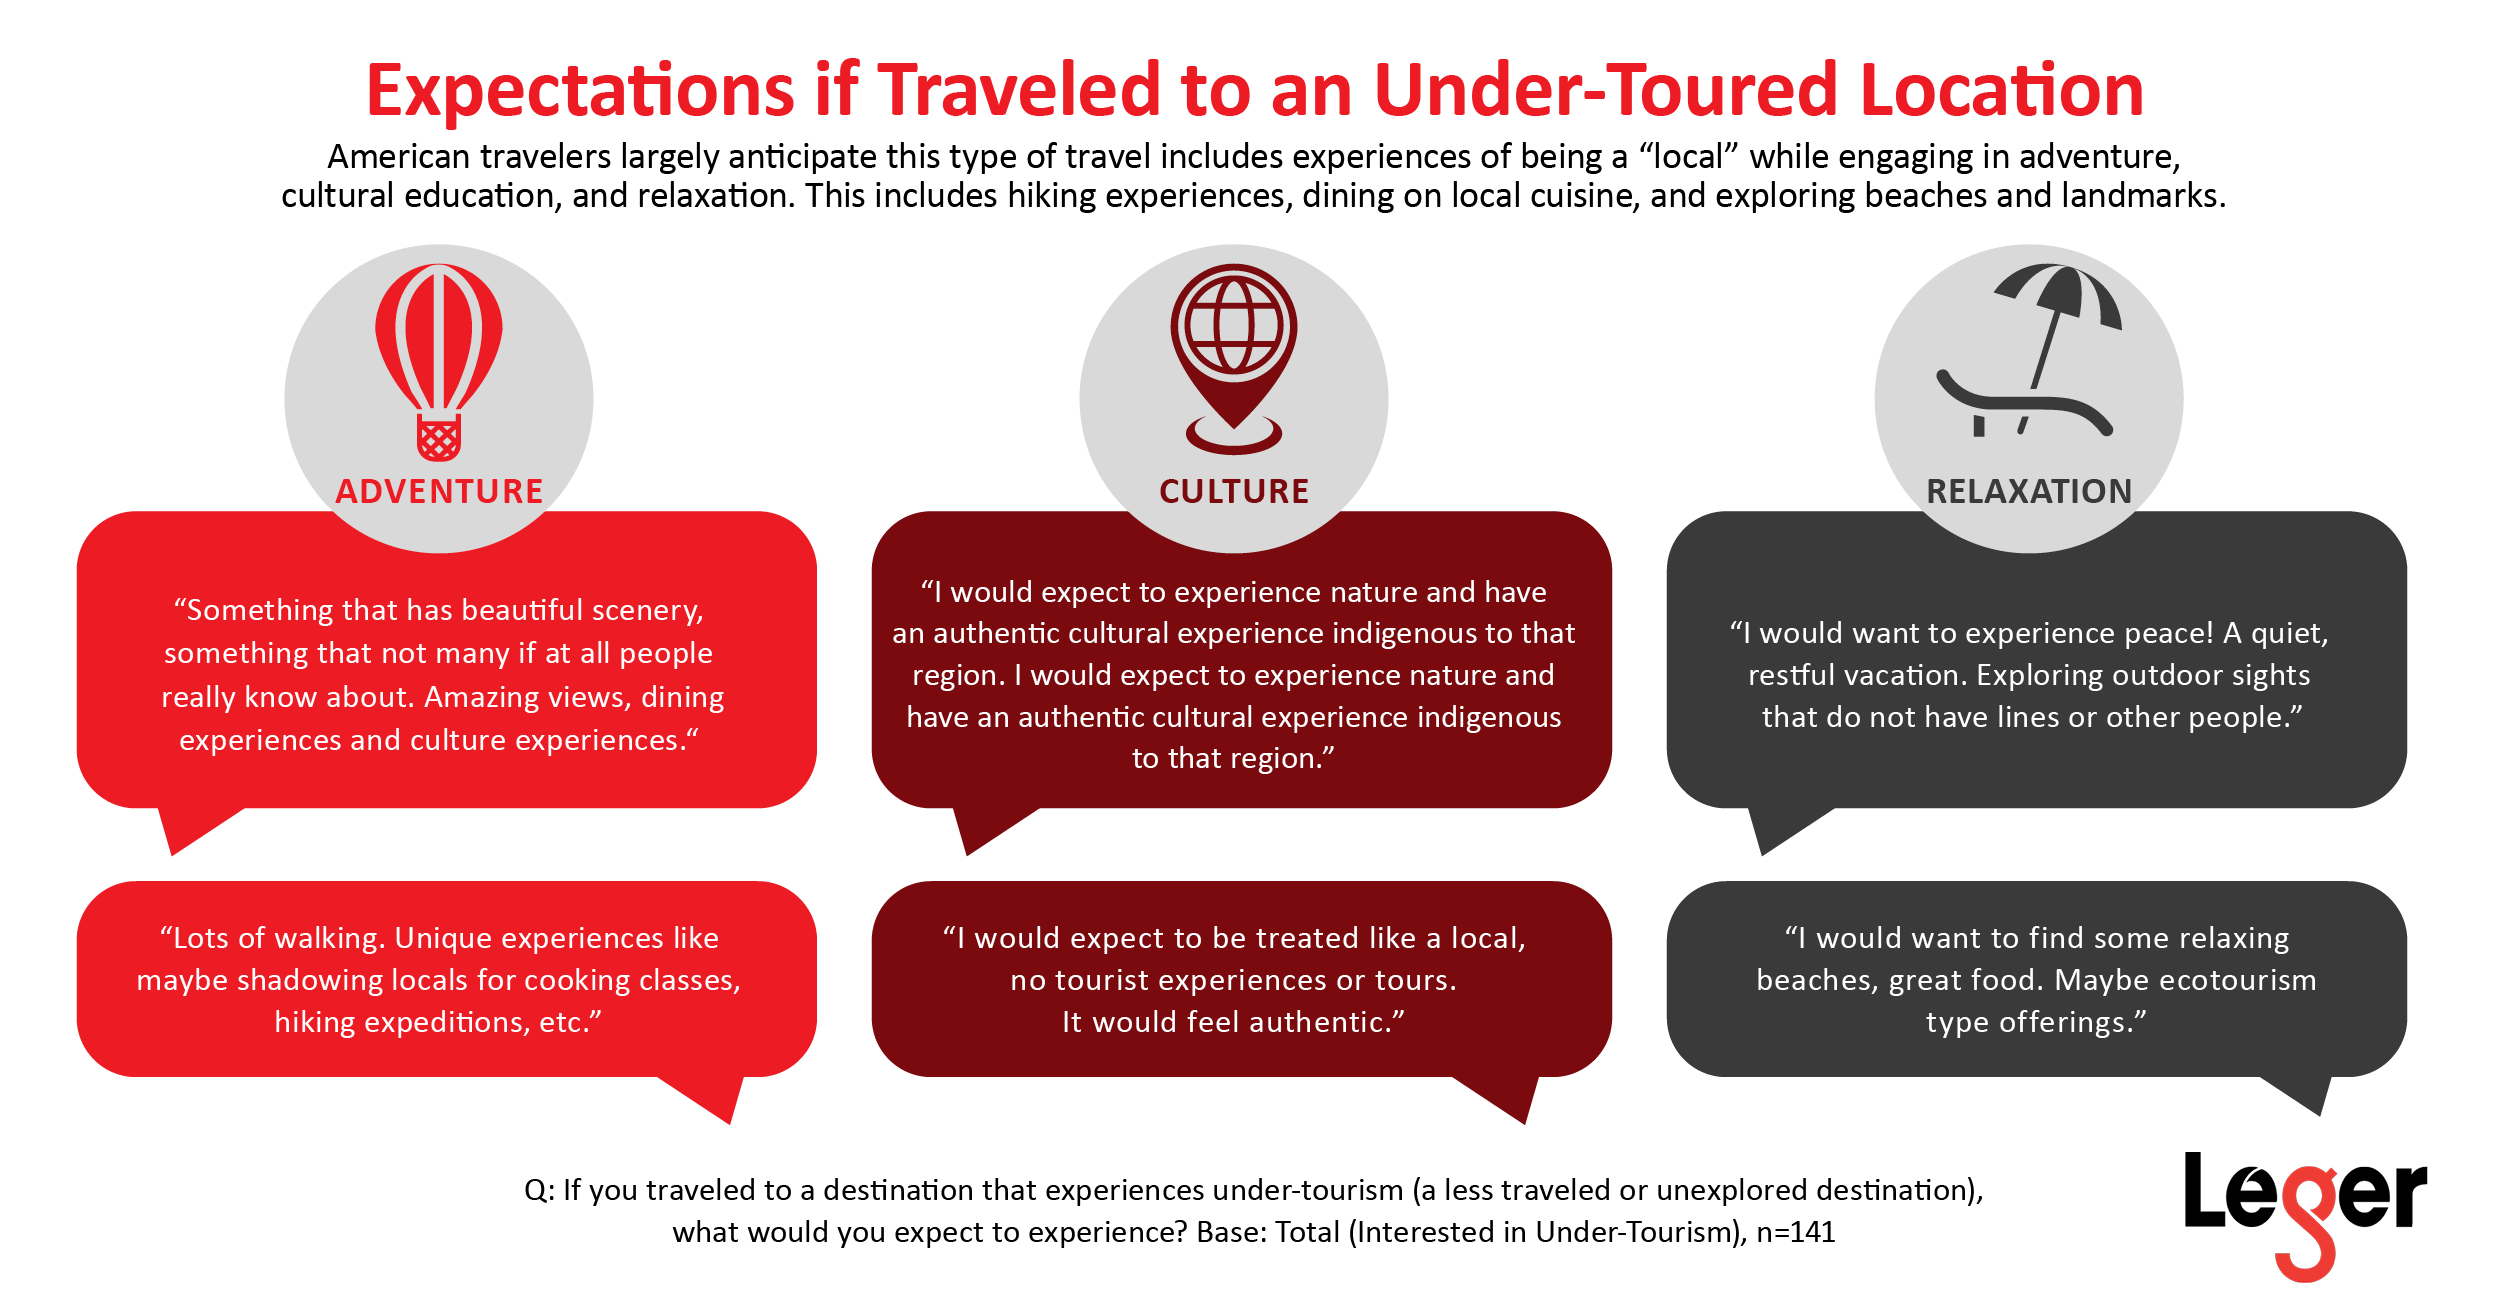 Expectations if traveled to an under-toured location